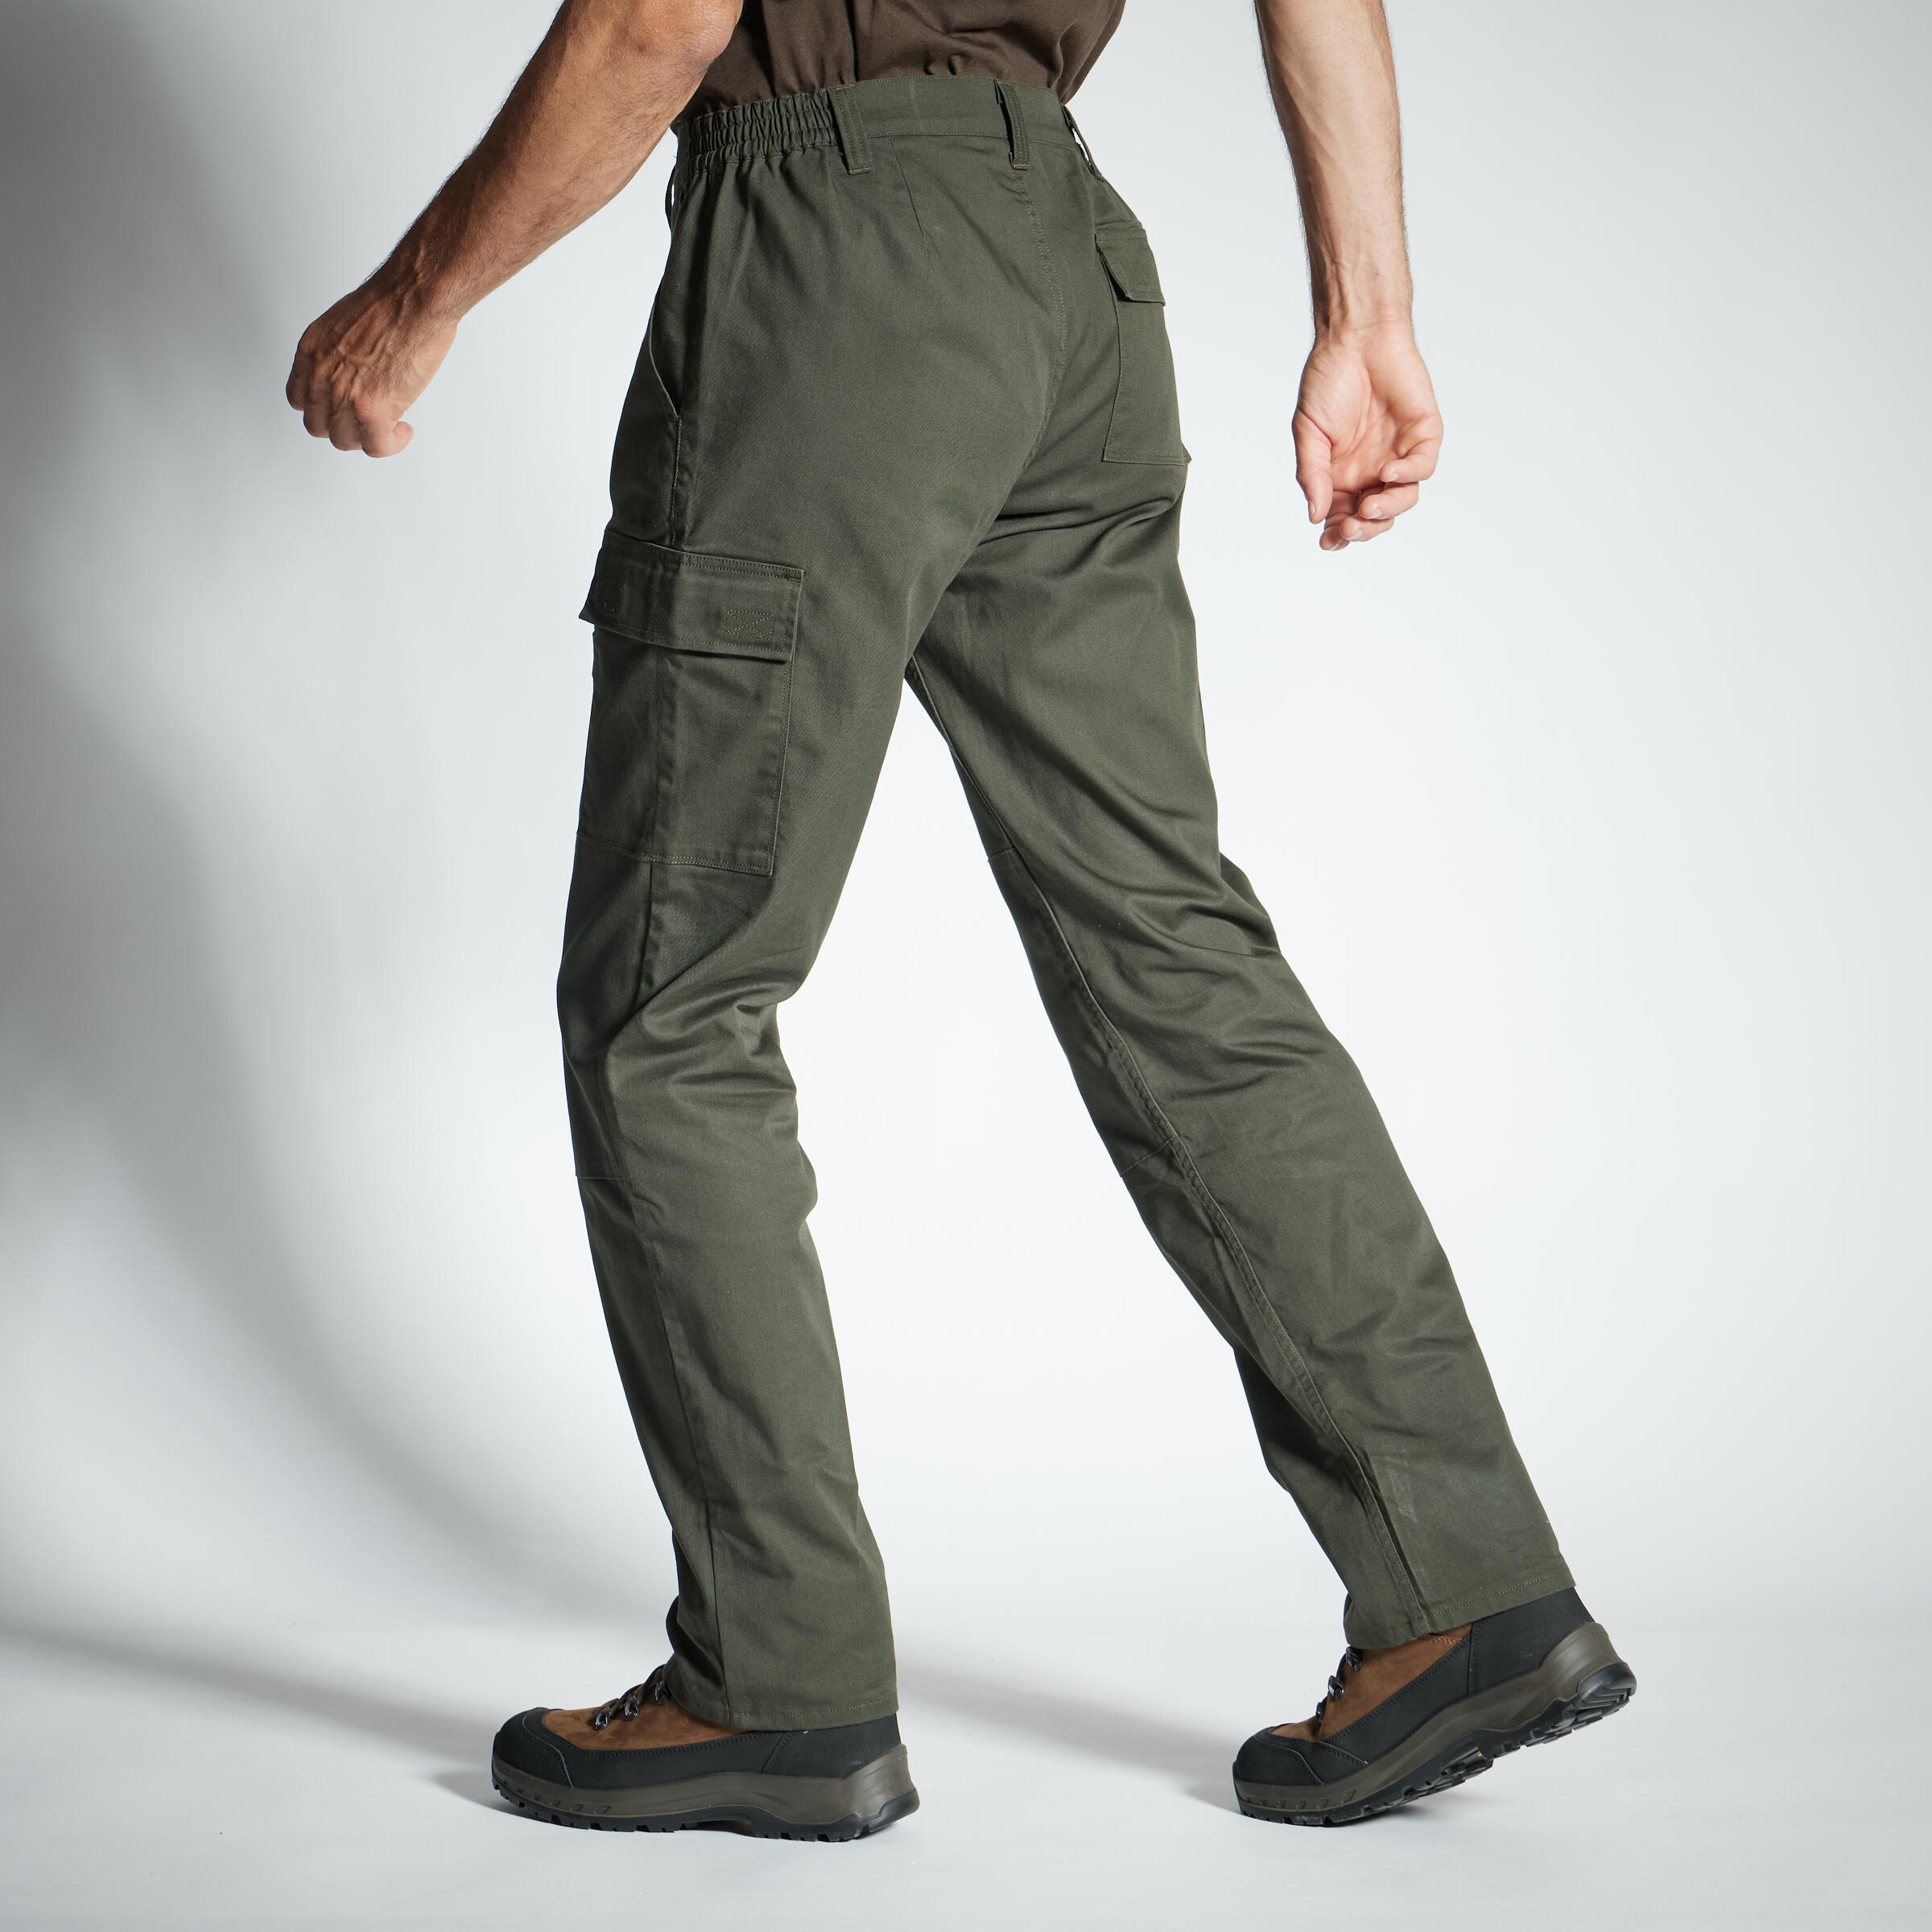 RESISTANT CARGO TROUSERS STEPPE 300 - BROWN - Decathlon